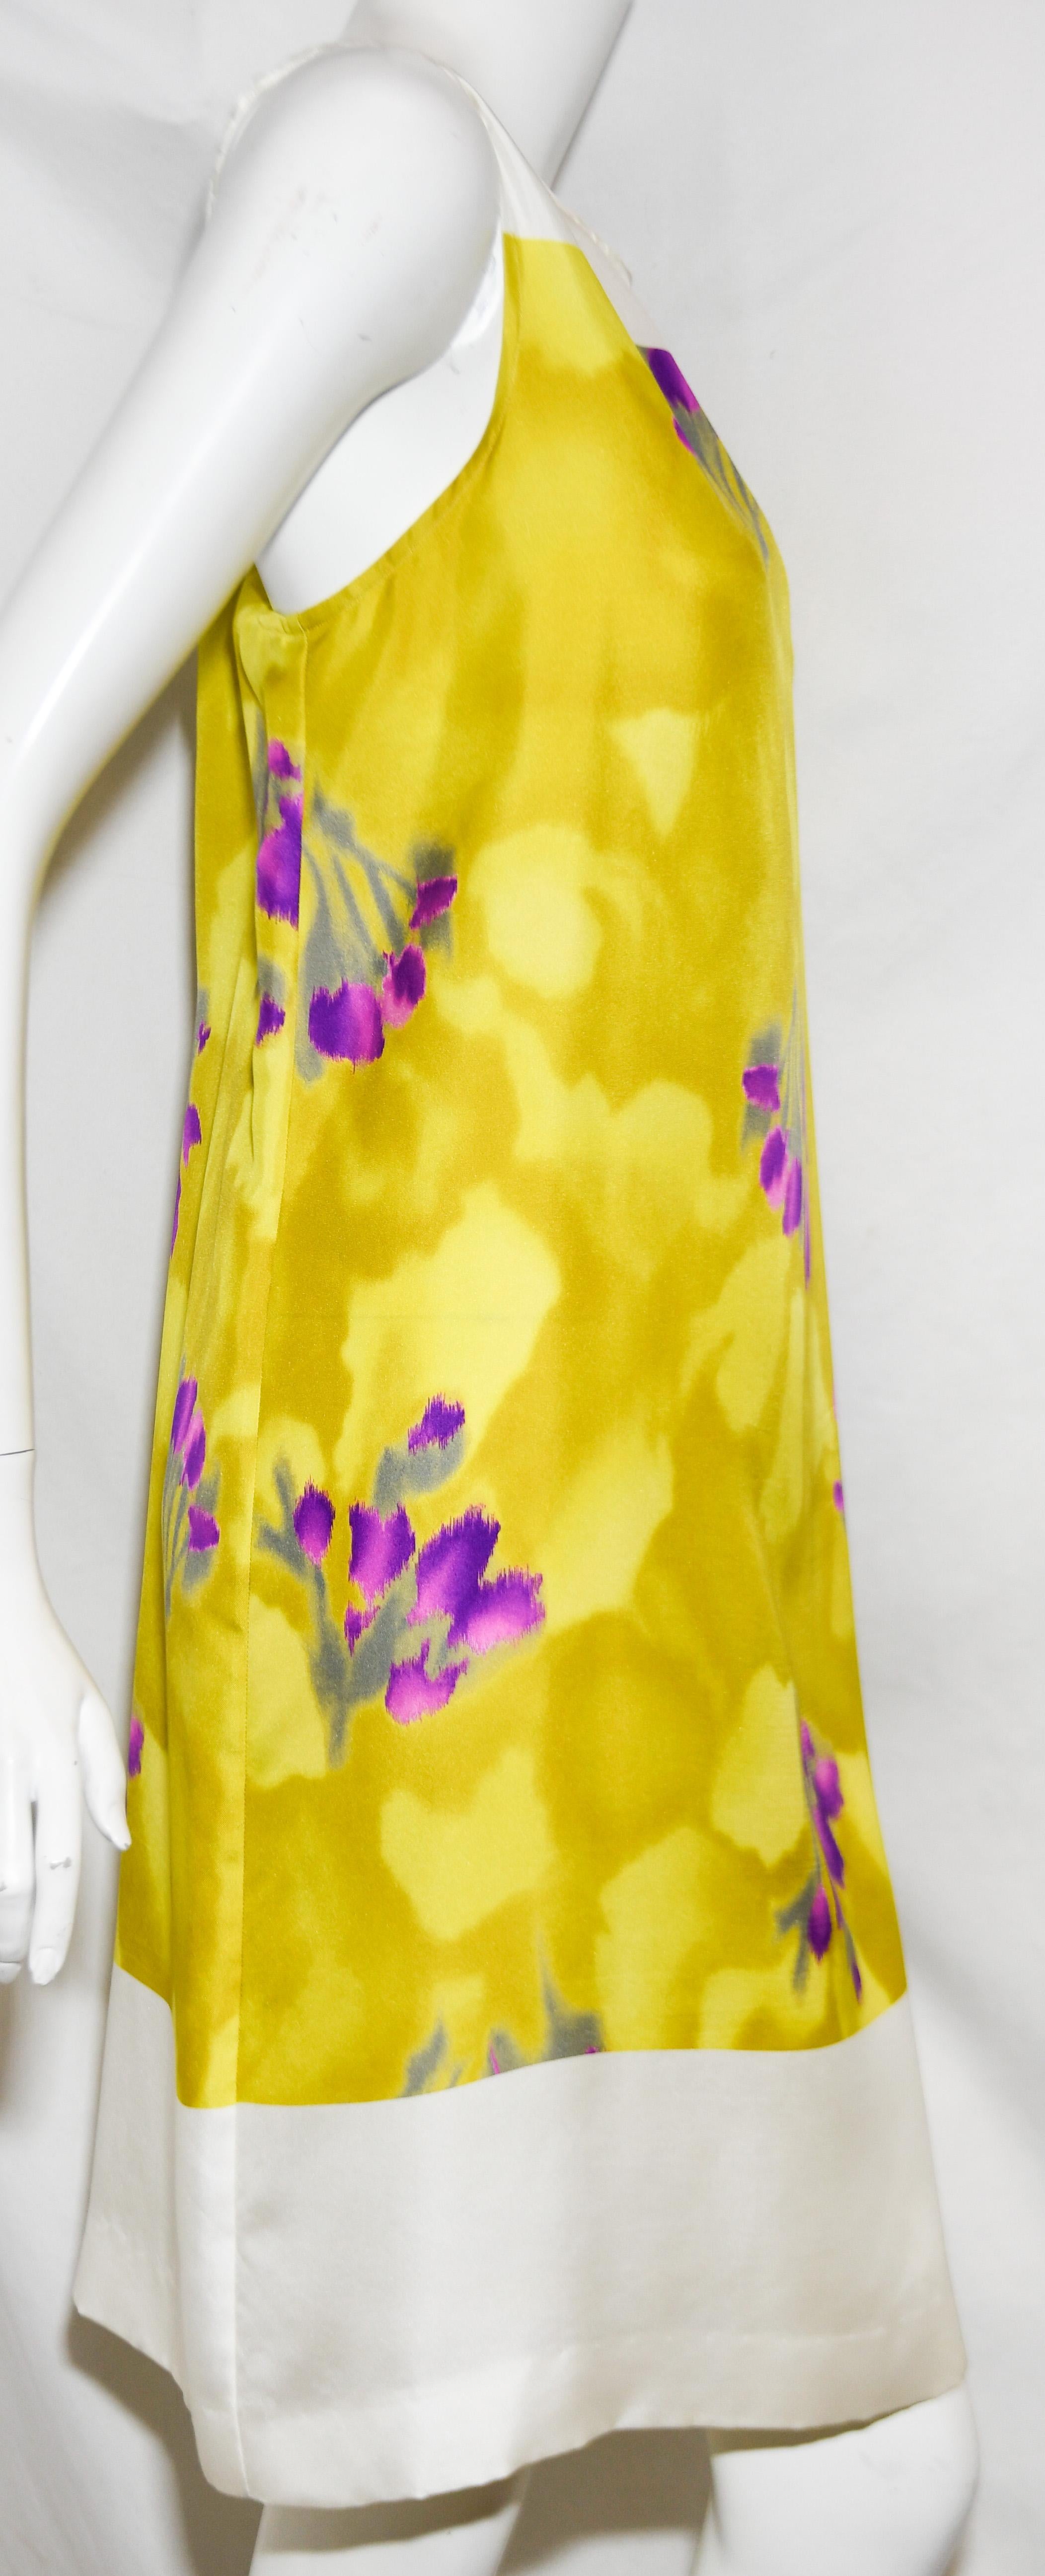 Dries Van Noten White, Yellow & Violet Floral Sleeveless Dress In Excellent Condition For Sale In Palm Beach, FL